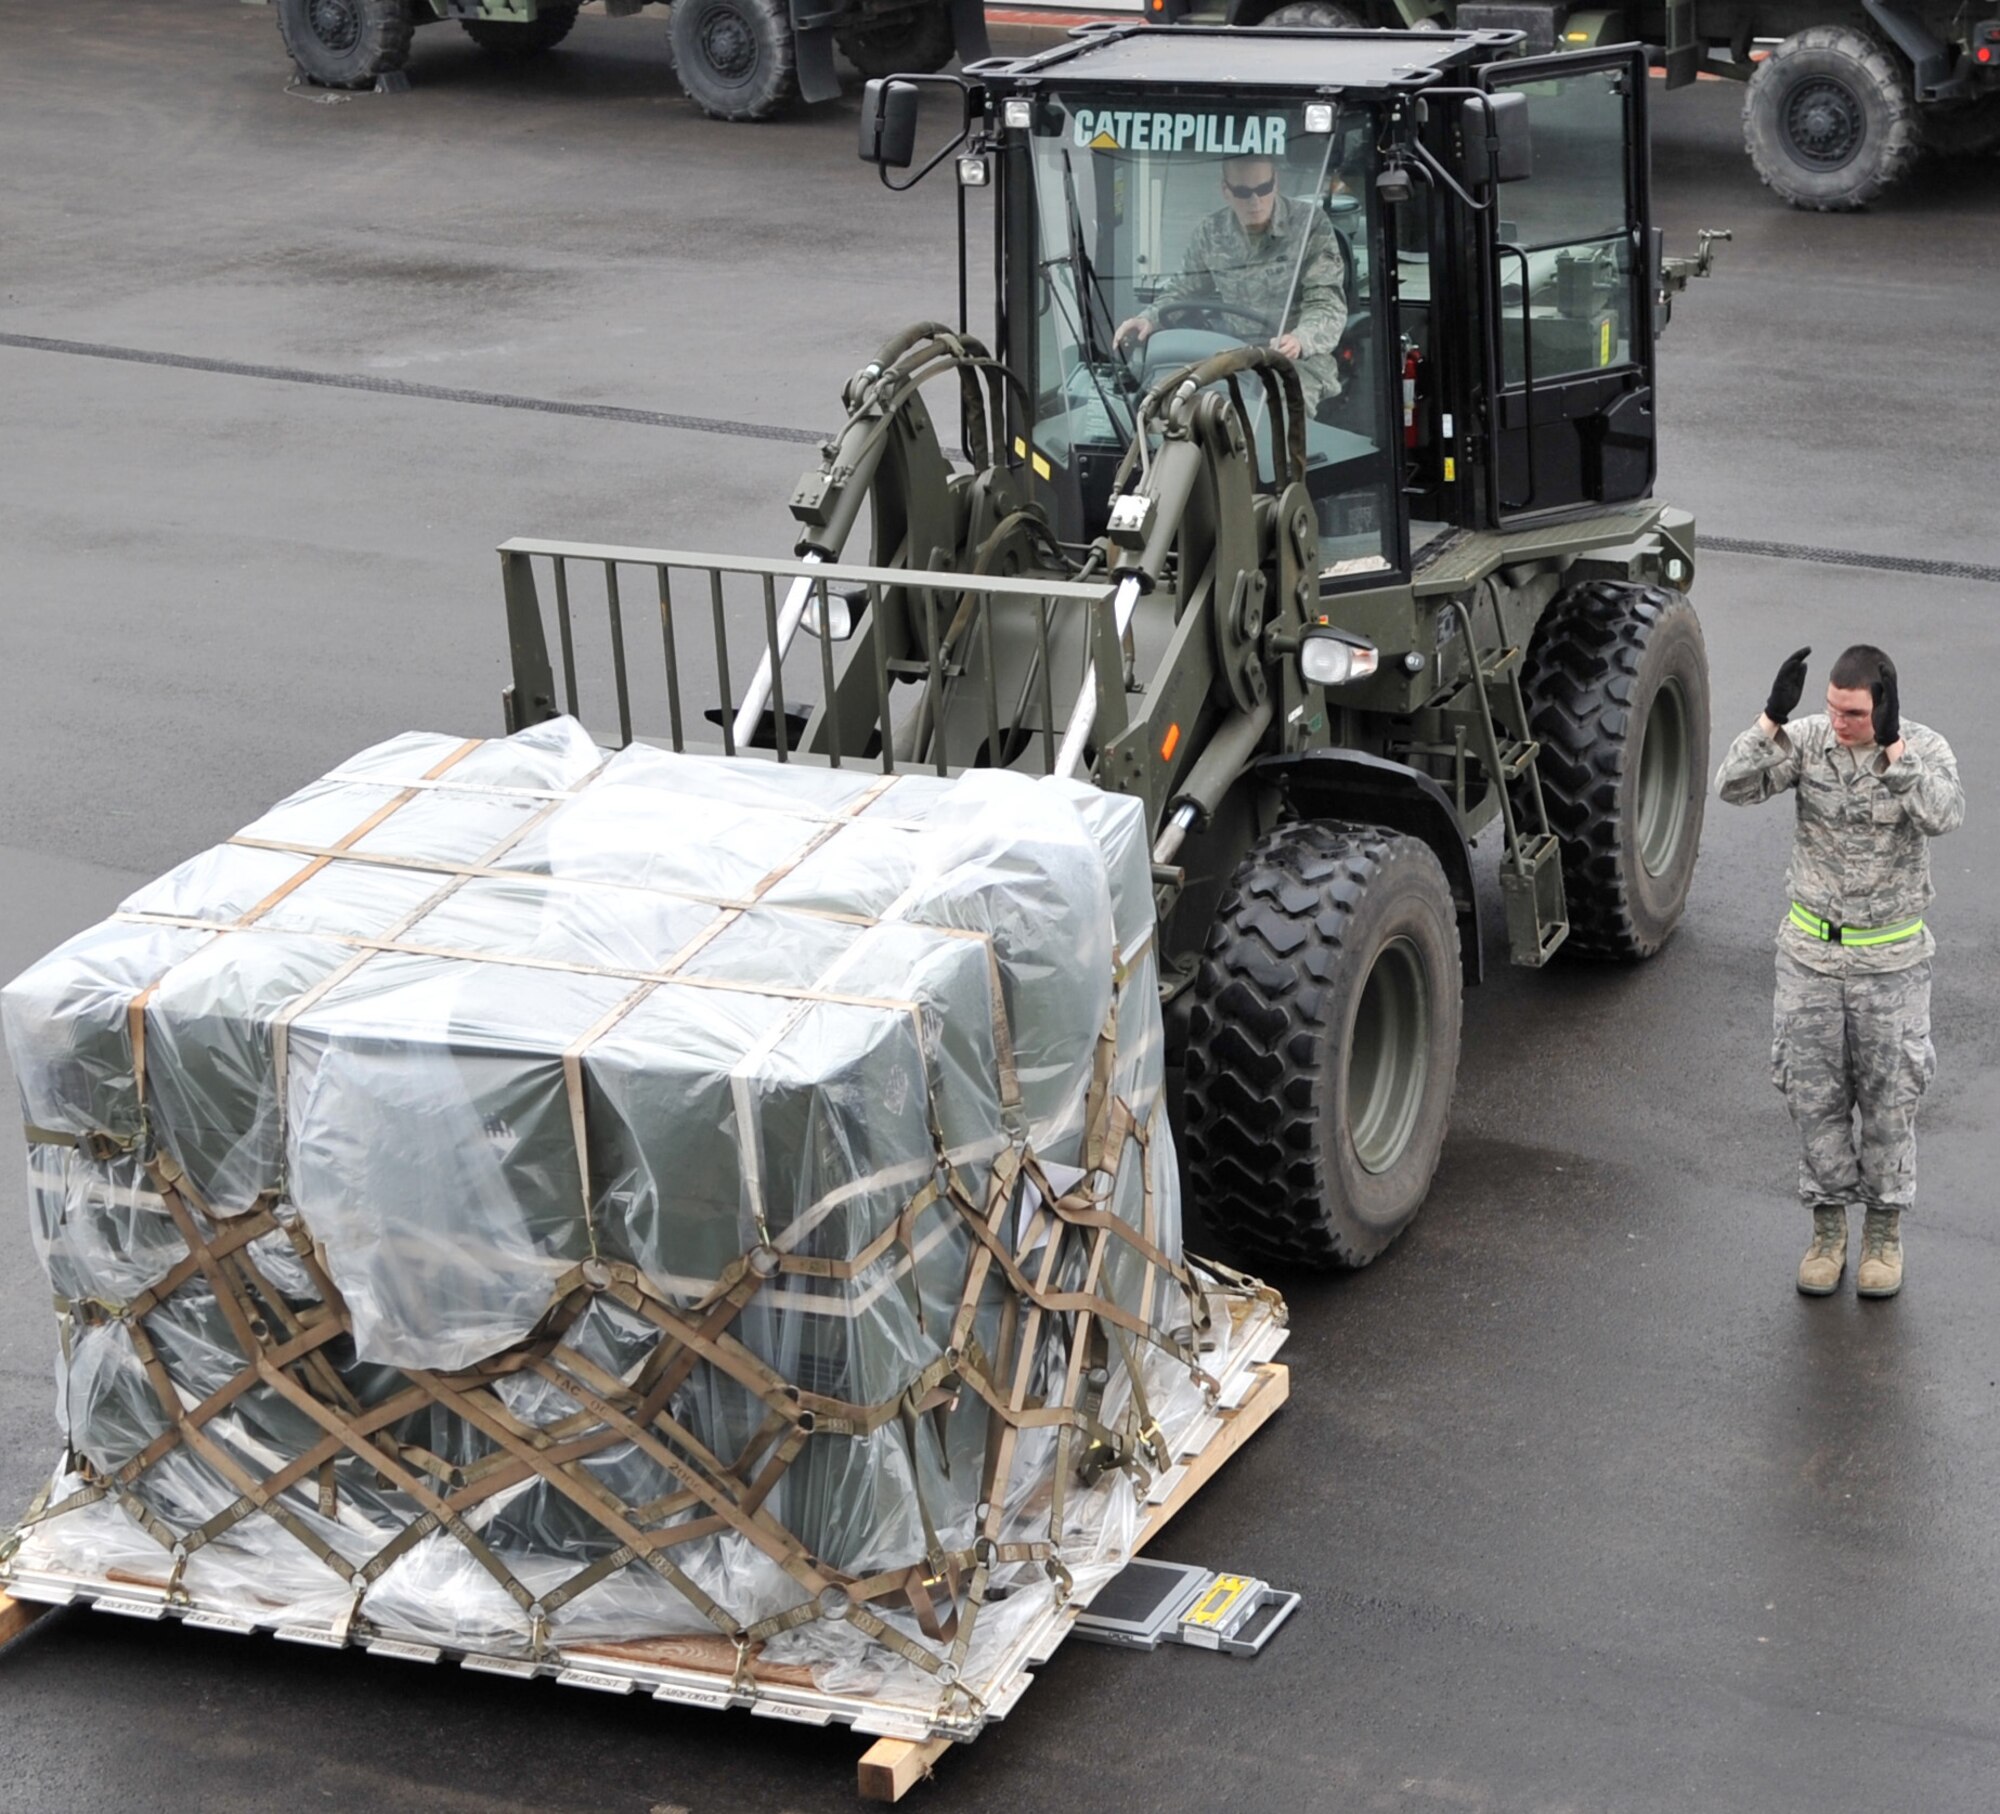 U.S. Air Force Senior Airman Justin Burger, 86th Logistics Readiness Squadron combat readiness technician, directs Airman 1st Class Philip Smouse, 86th LRS air transport, as he moves cargo during an in-check in support of Operation Unified Protector, Ramstein Air Base, Germany, April 1, 2011. Unified Protector is a NATO-led operation in Libya to protect civilians and civilian-populated areas under threat of attack. (U.S. Air Force photo by Senior Airman Caleb Pierce)